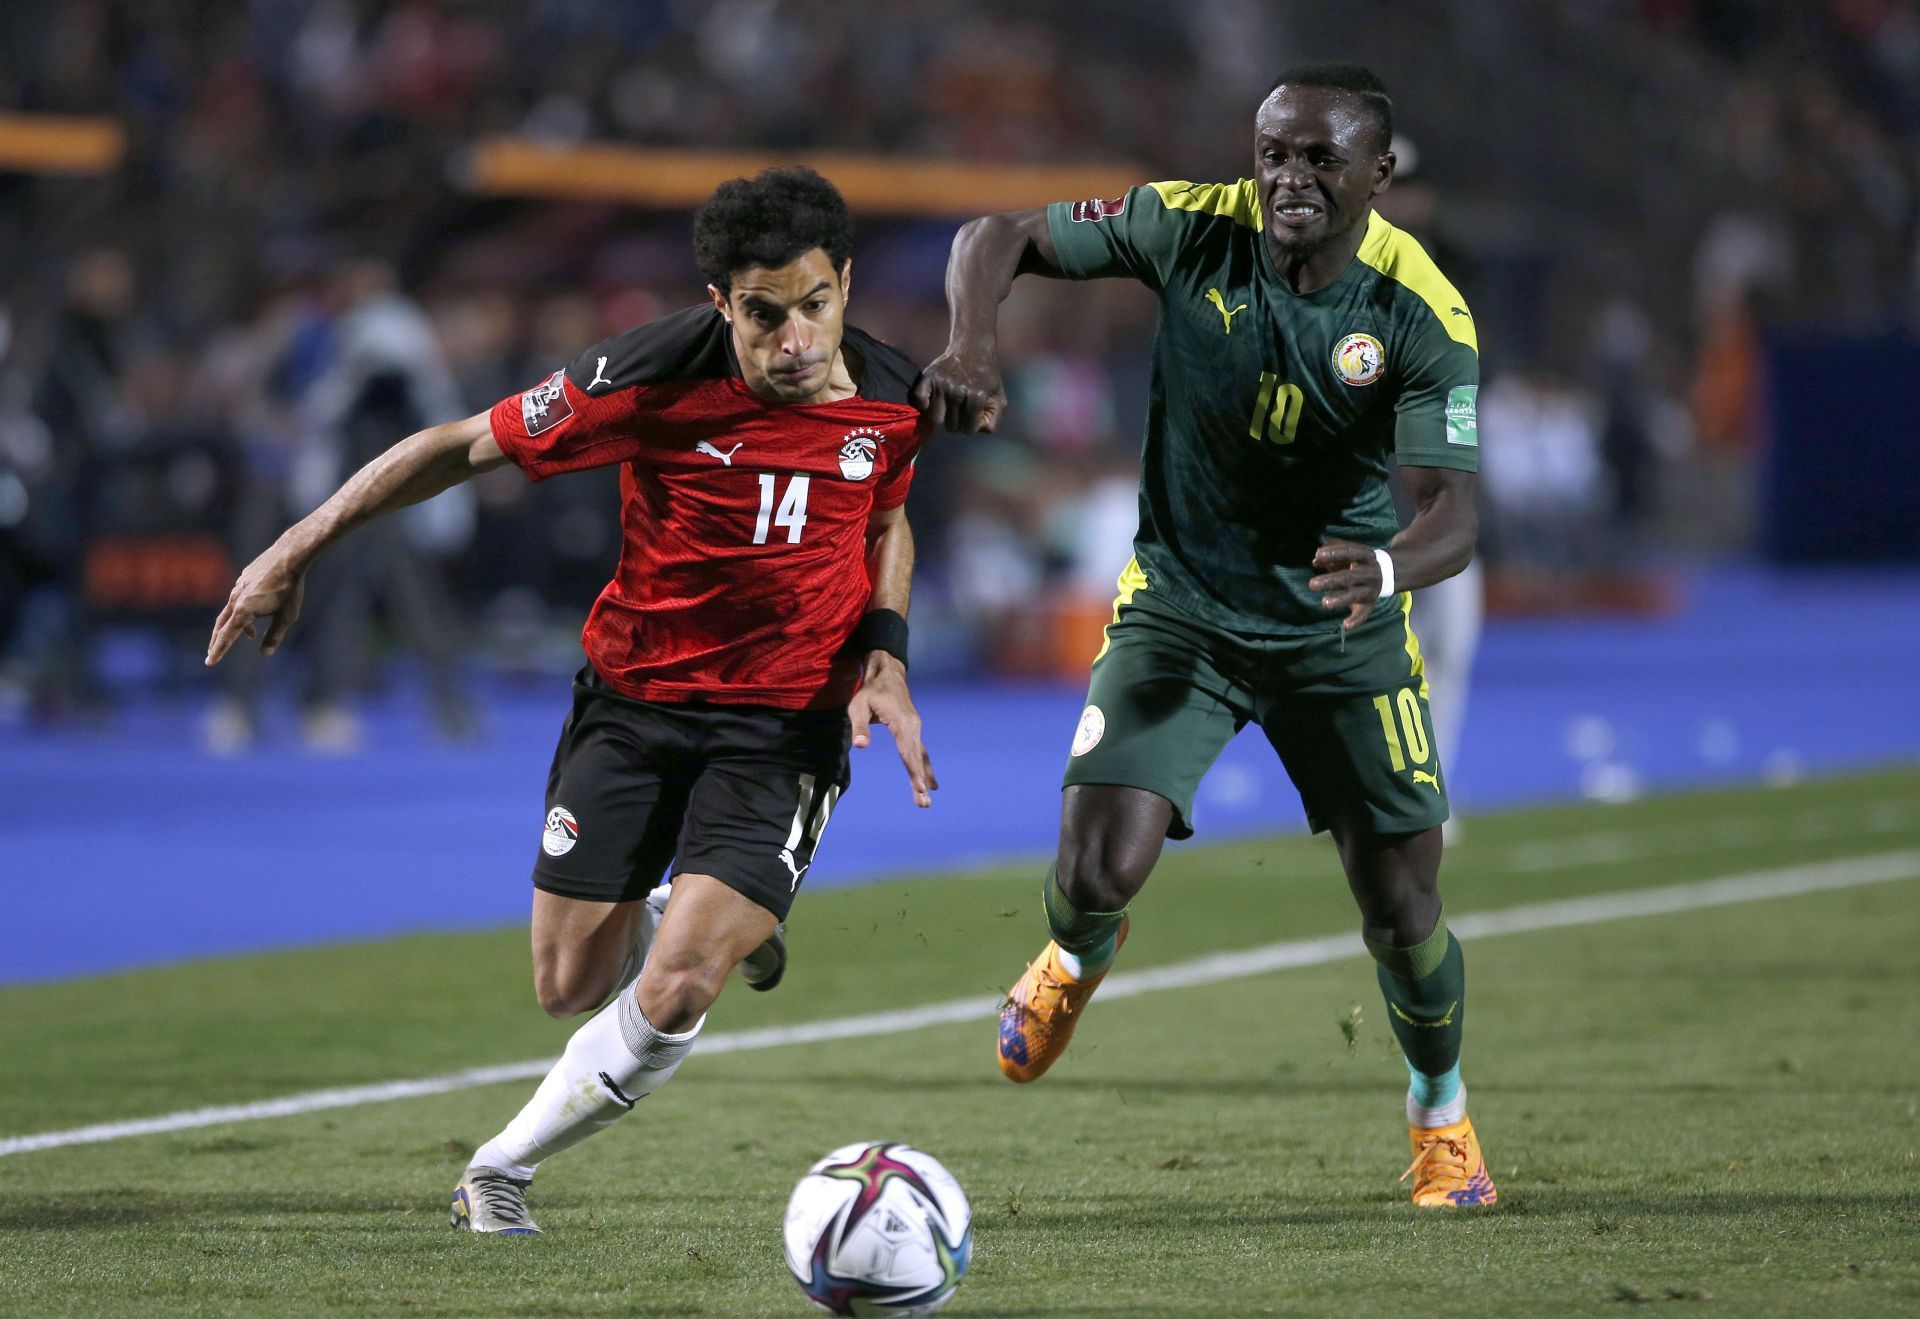 Senegal once again triumph over Egypt in contentious fashion on Tuesday night